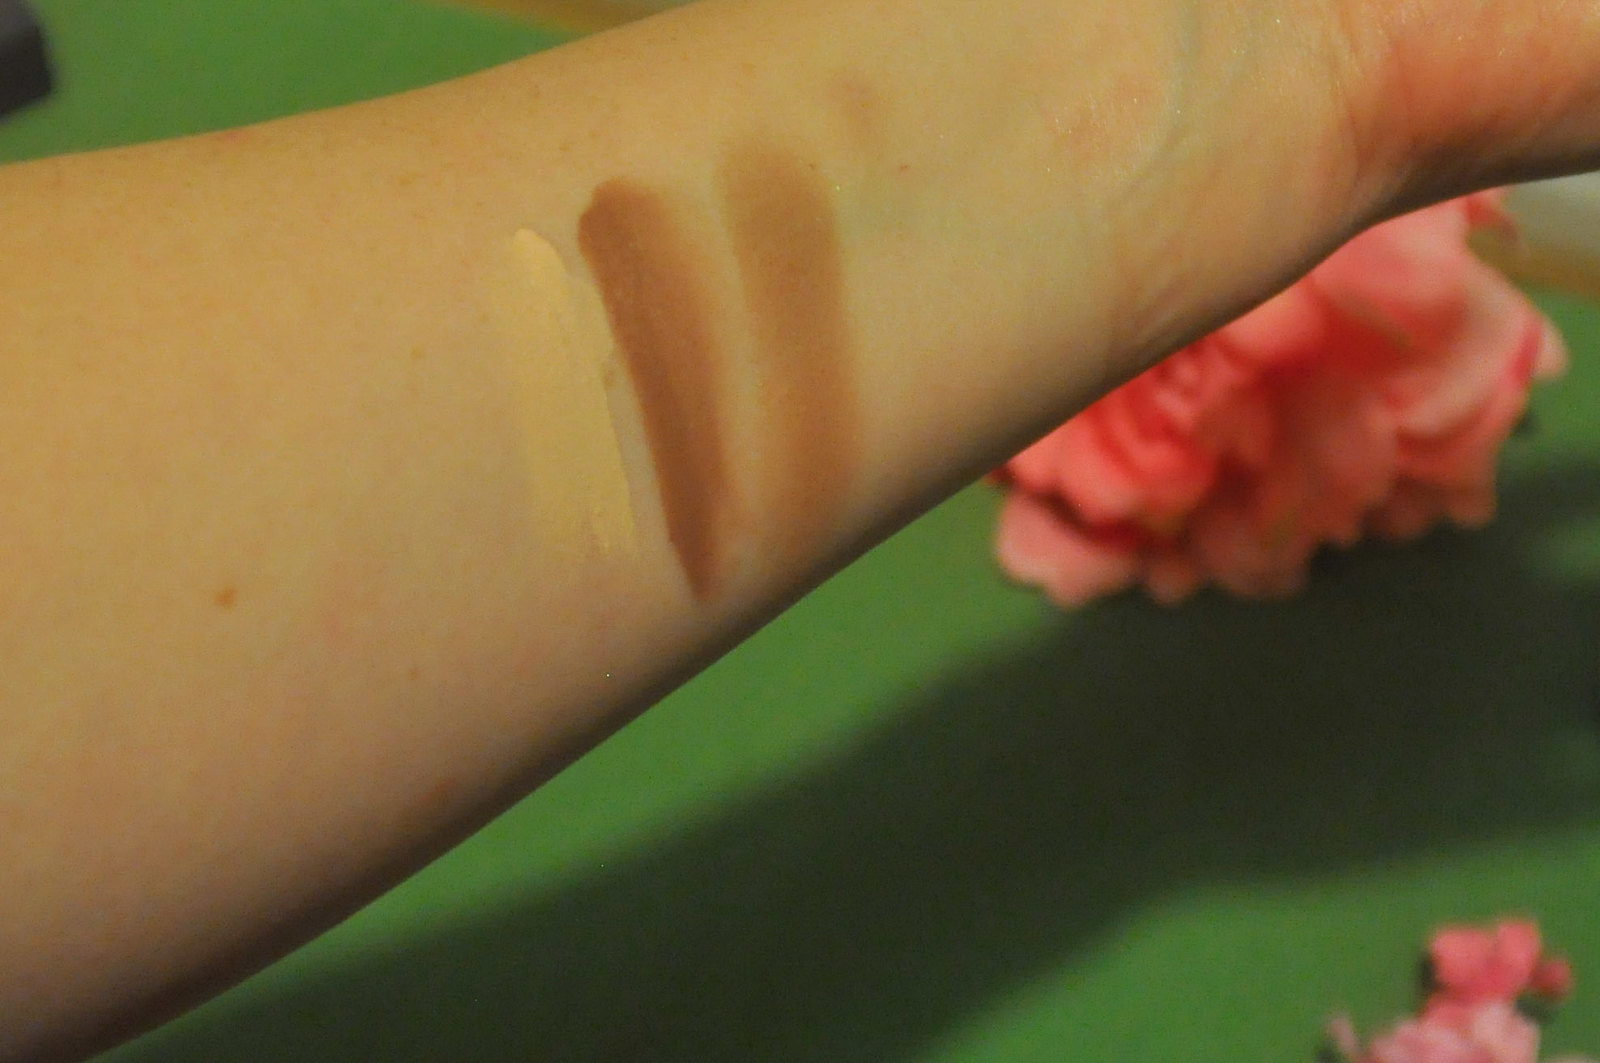 NYX Contour Pro Single in Sculpt Review and Swatches